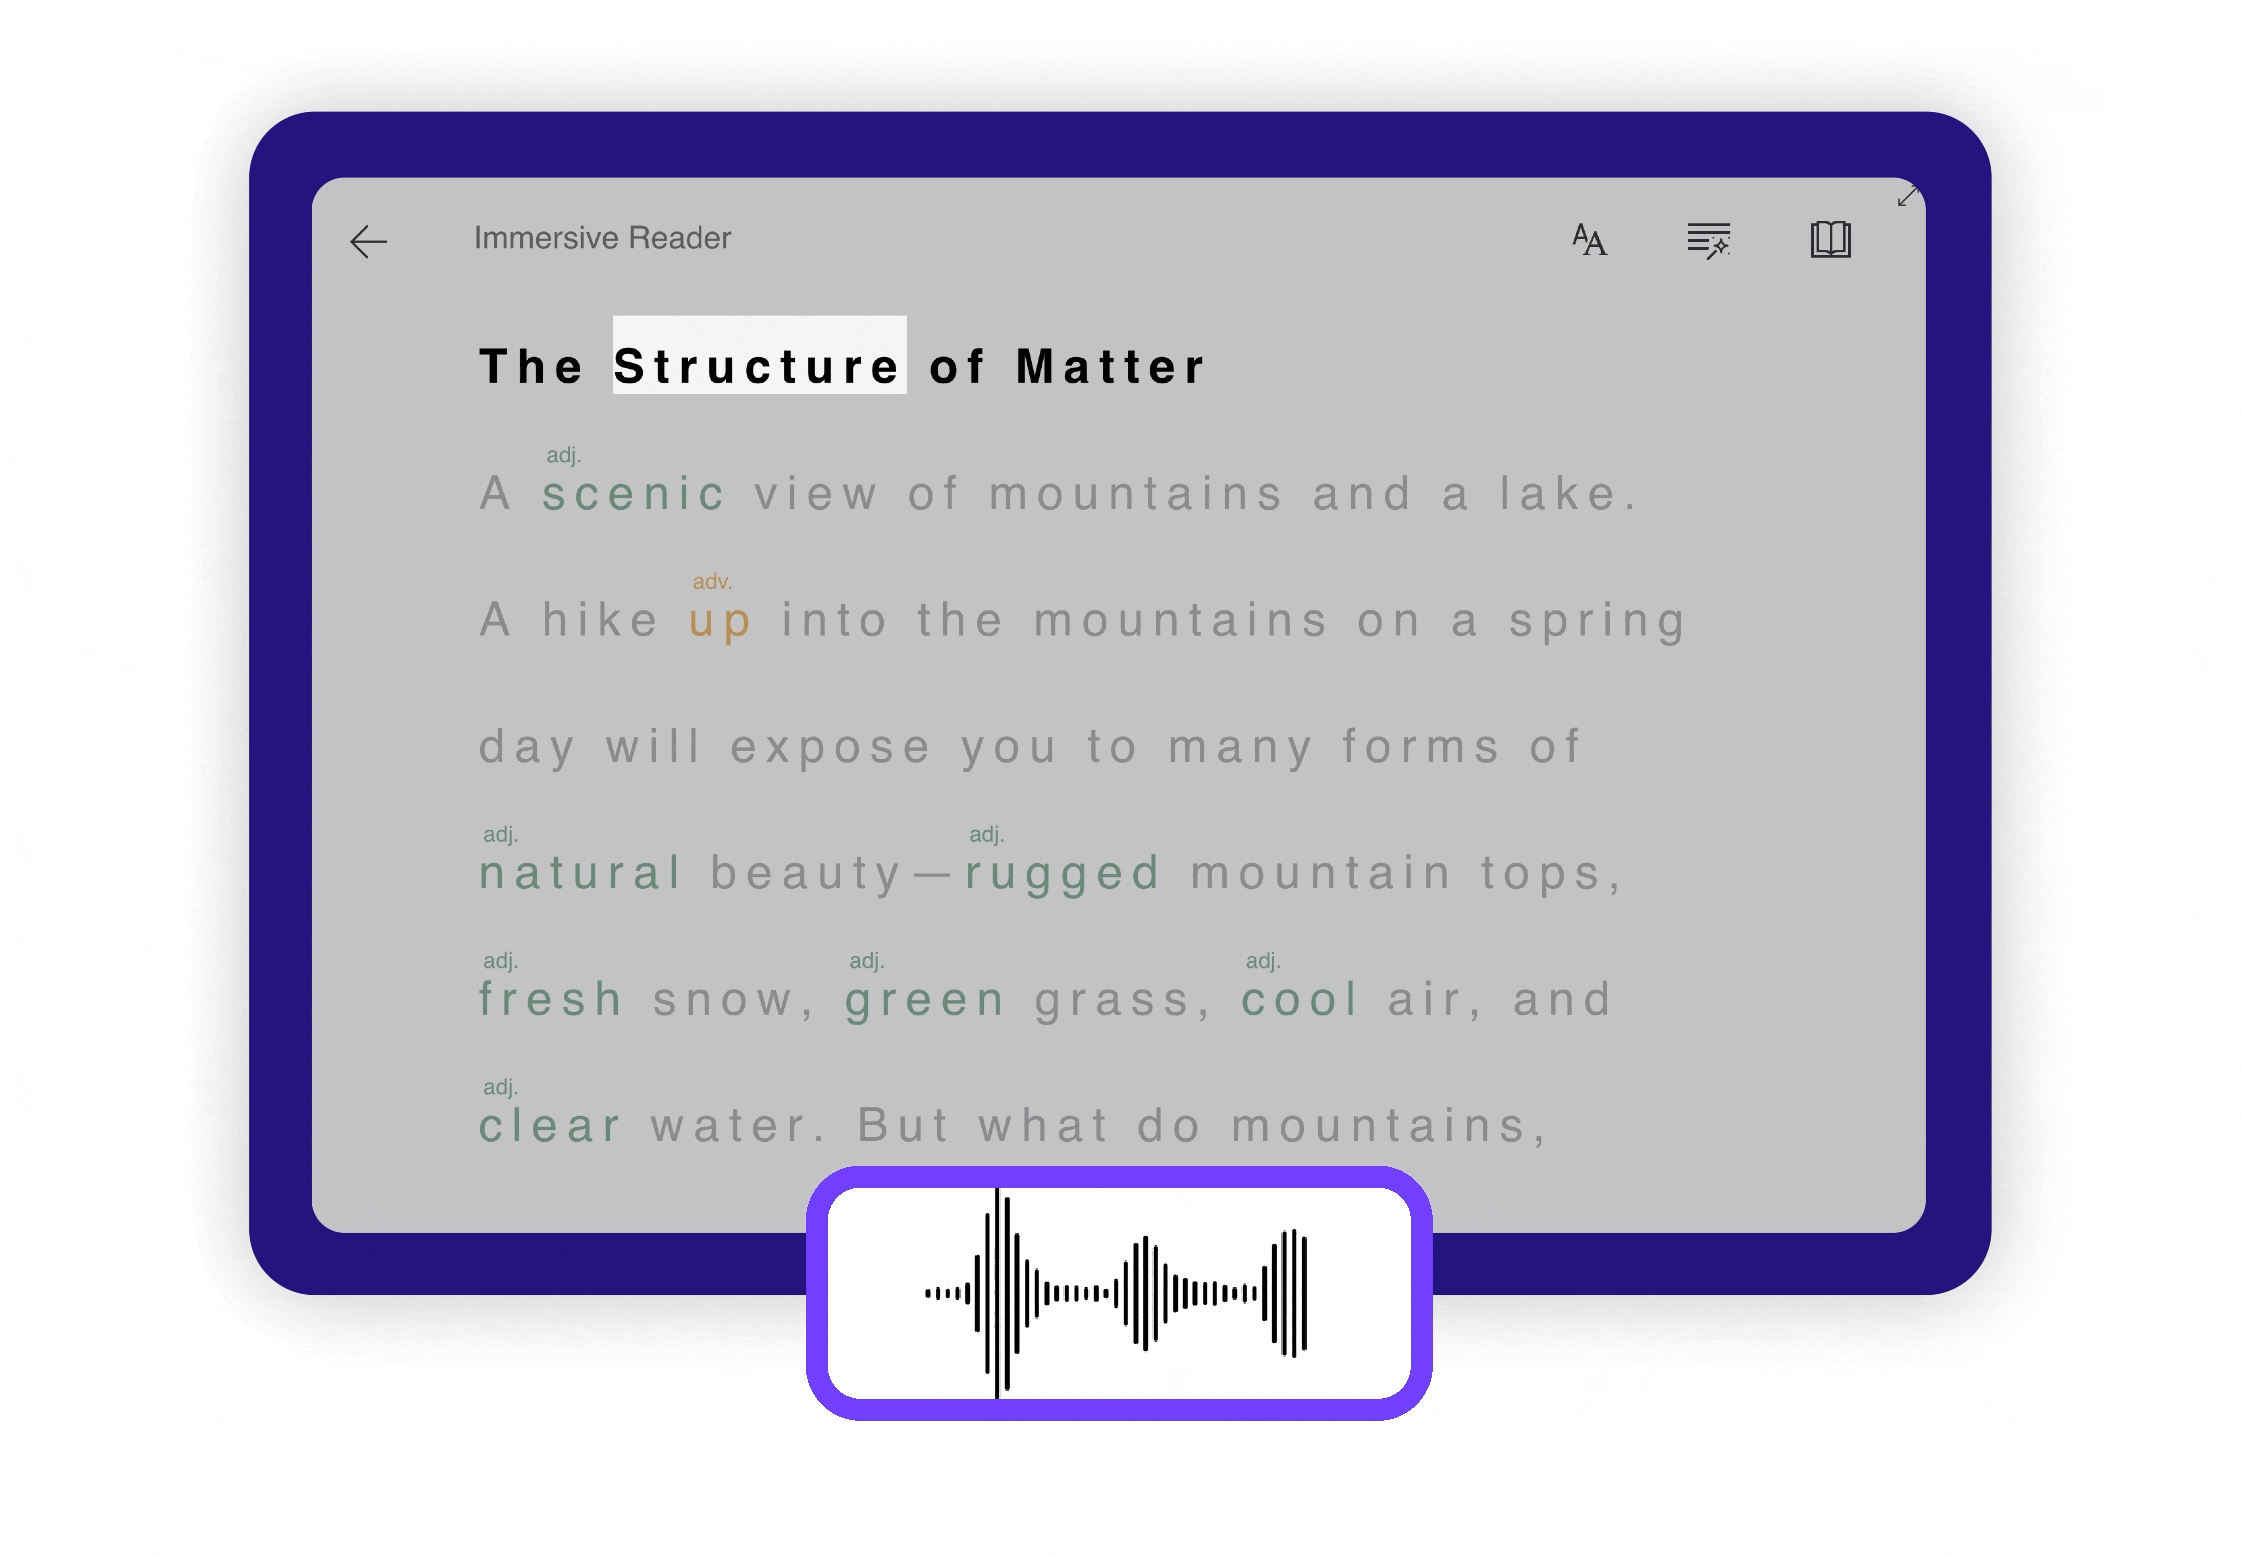 An image showing how the Propello platform can read text aloud for students